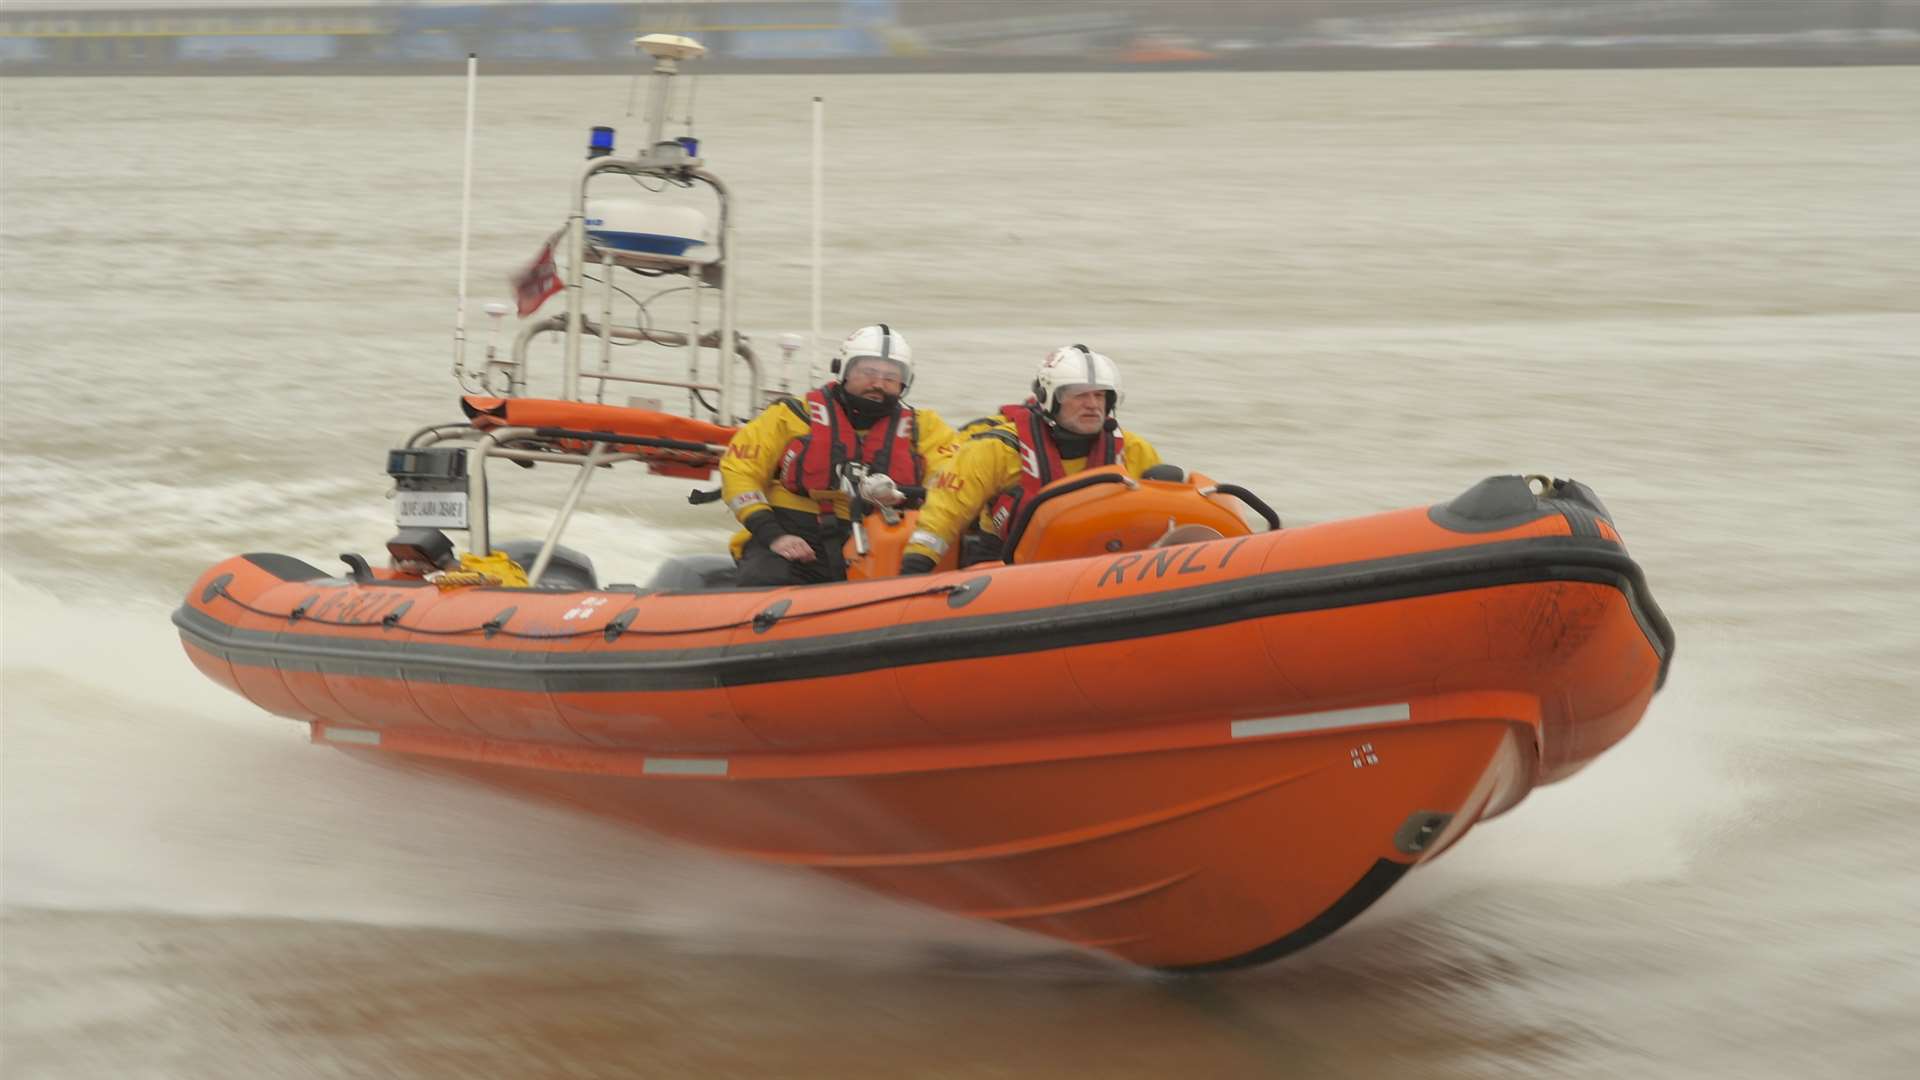 The RNLI lifeboat launching at Gravesend